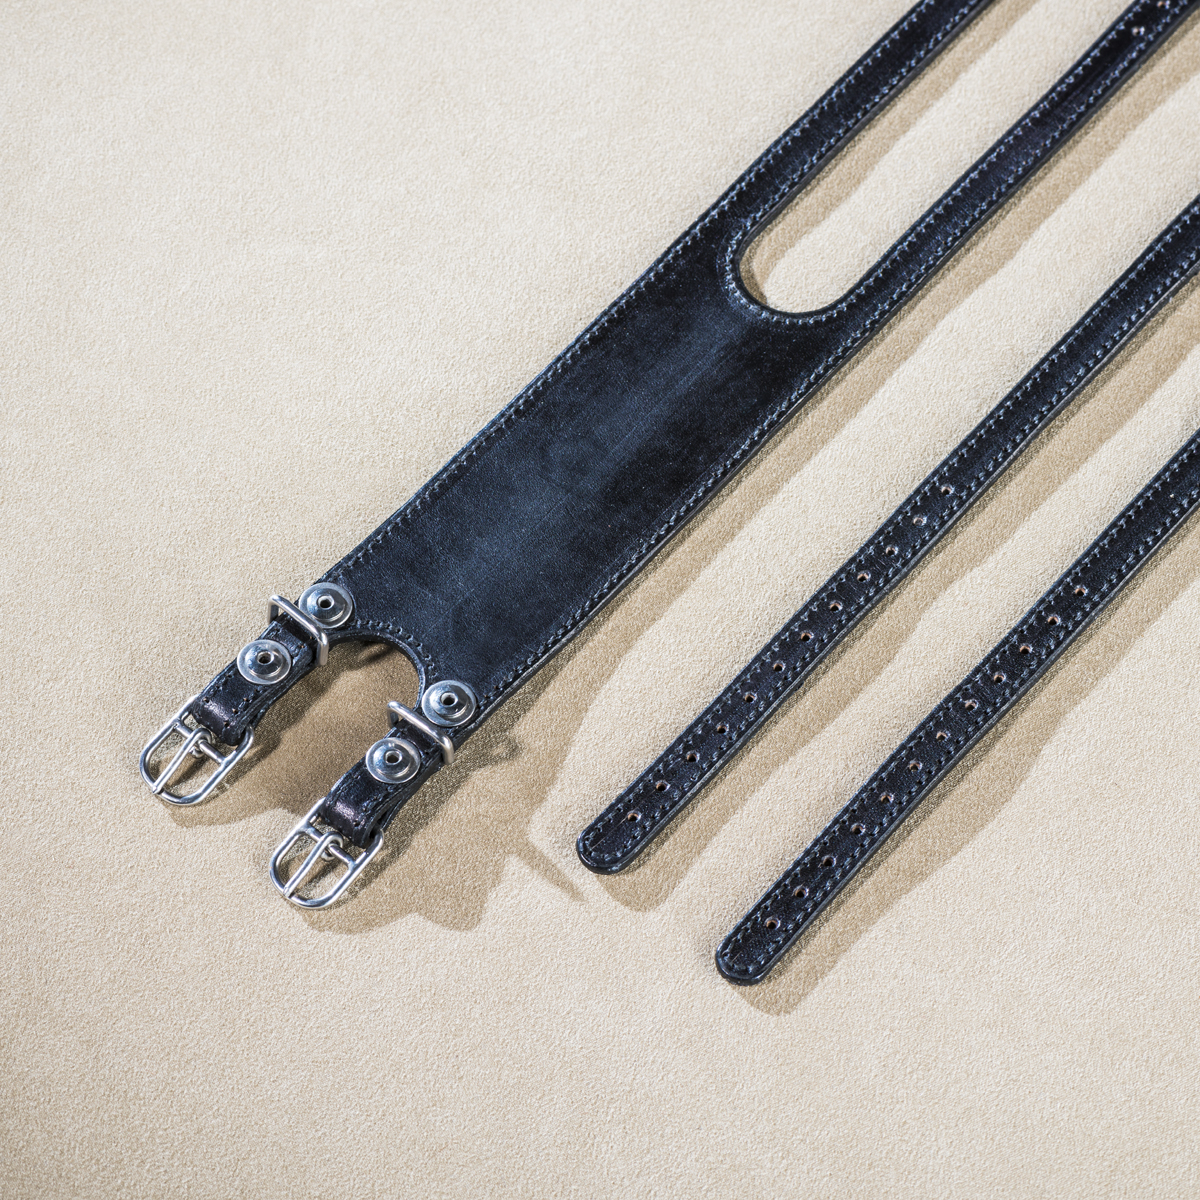 Leather straps for fixed gear Black 4.